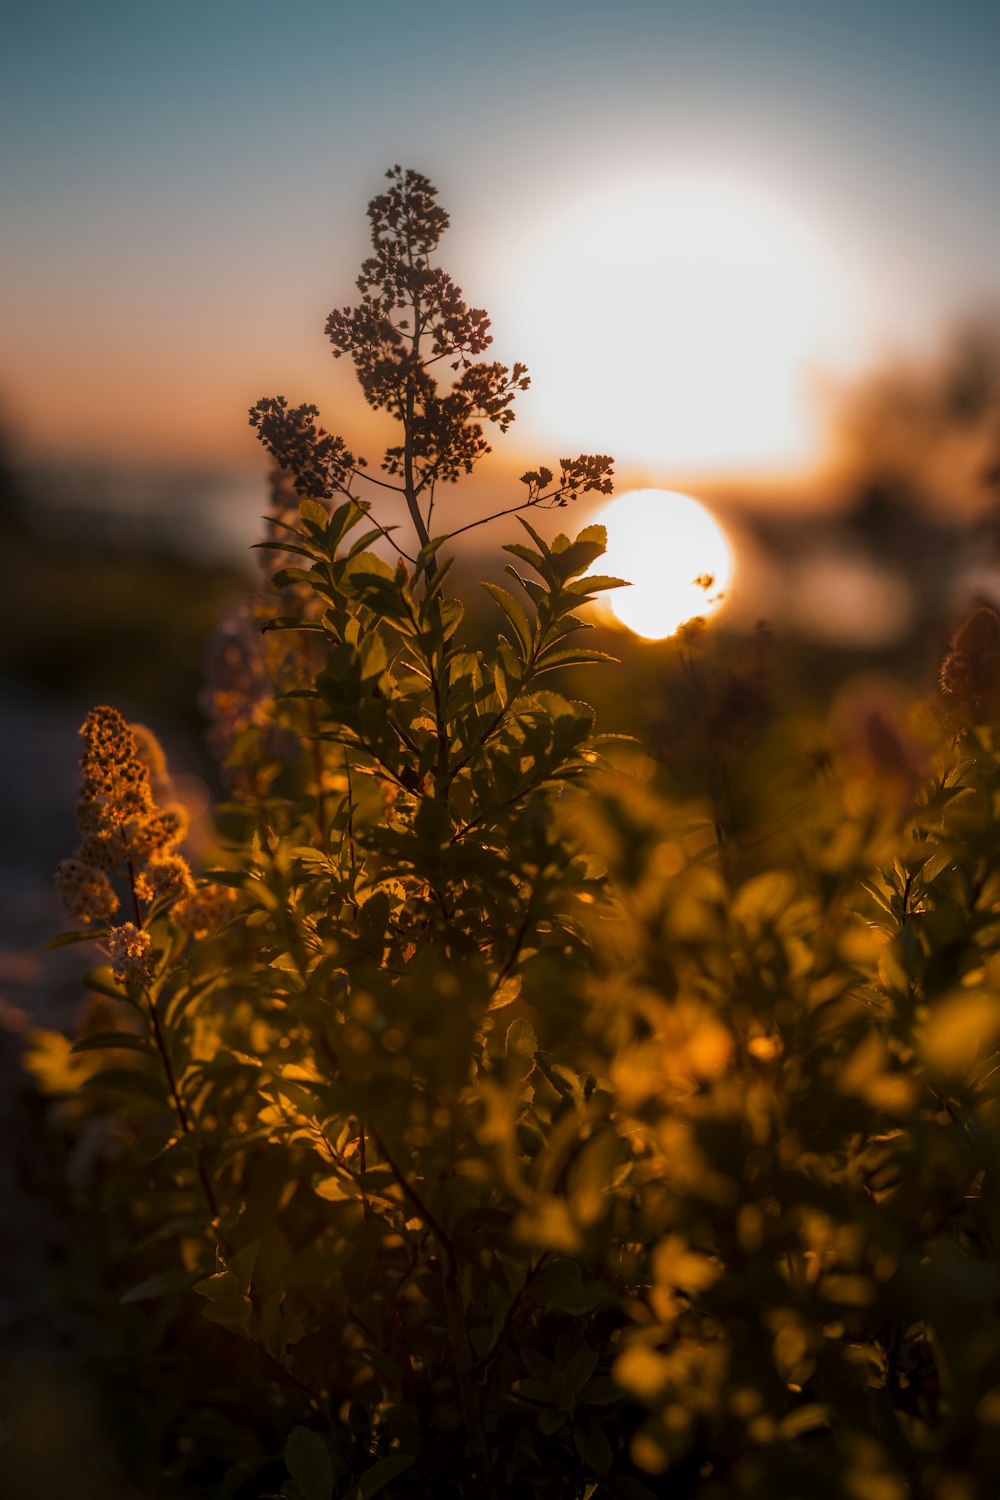 green leafed plant during sunset